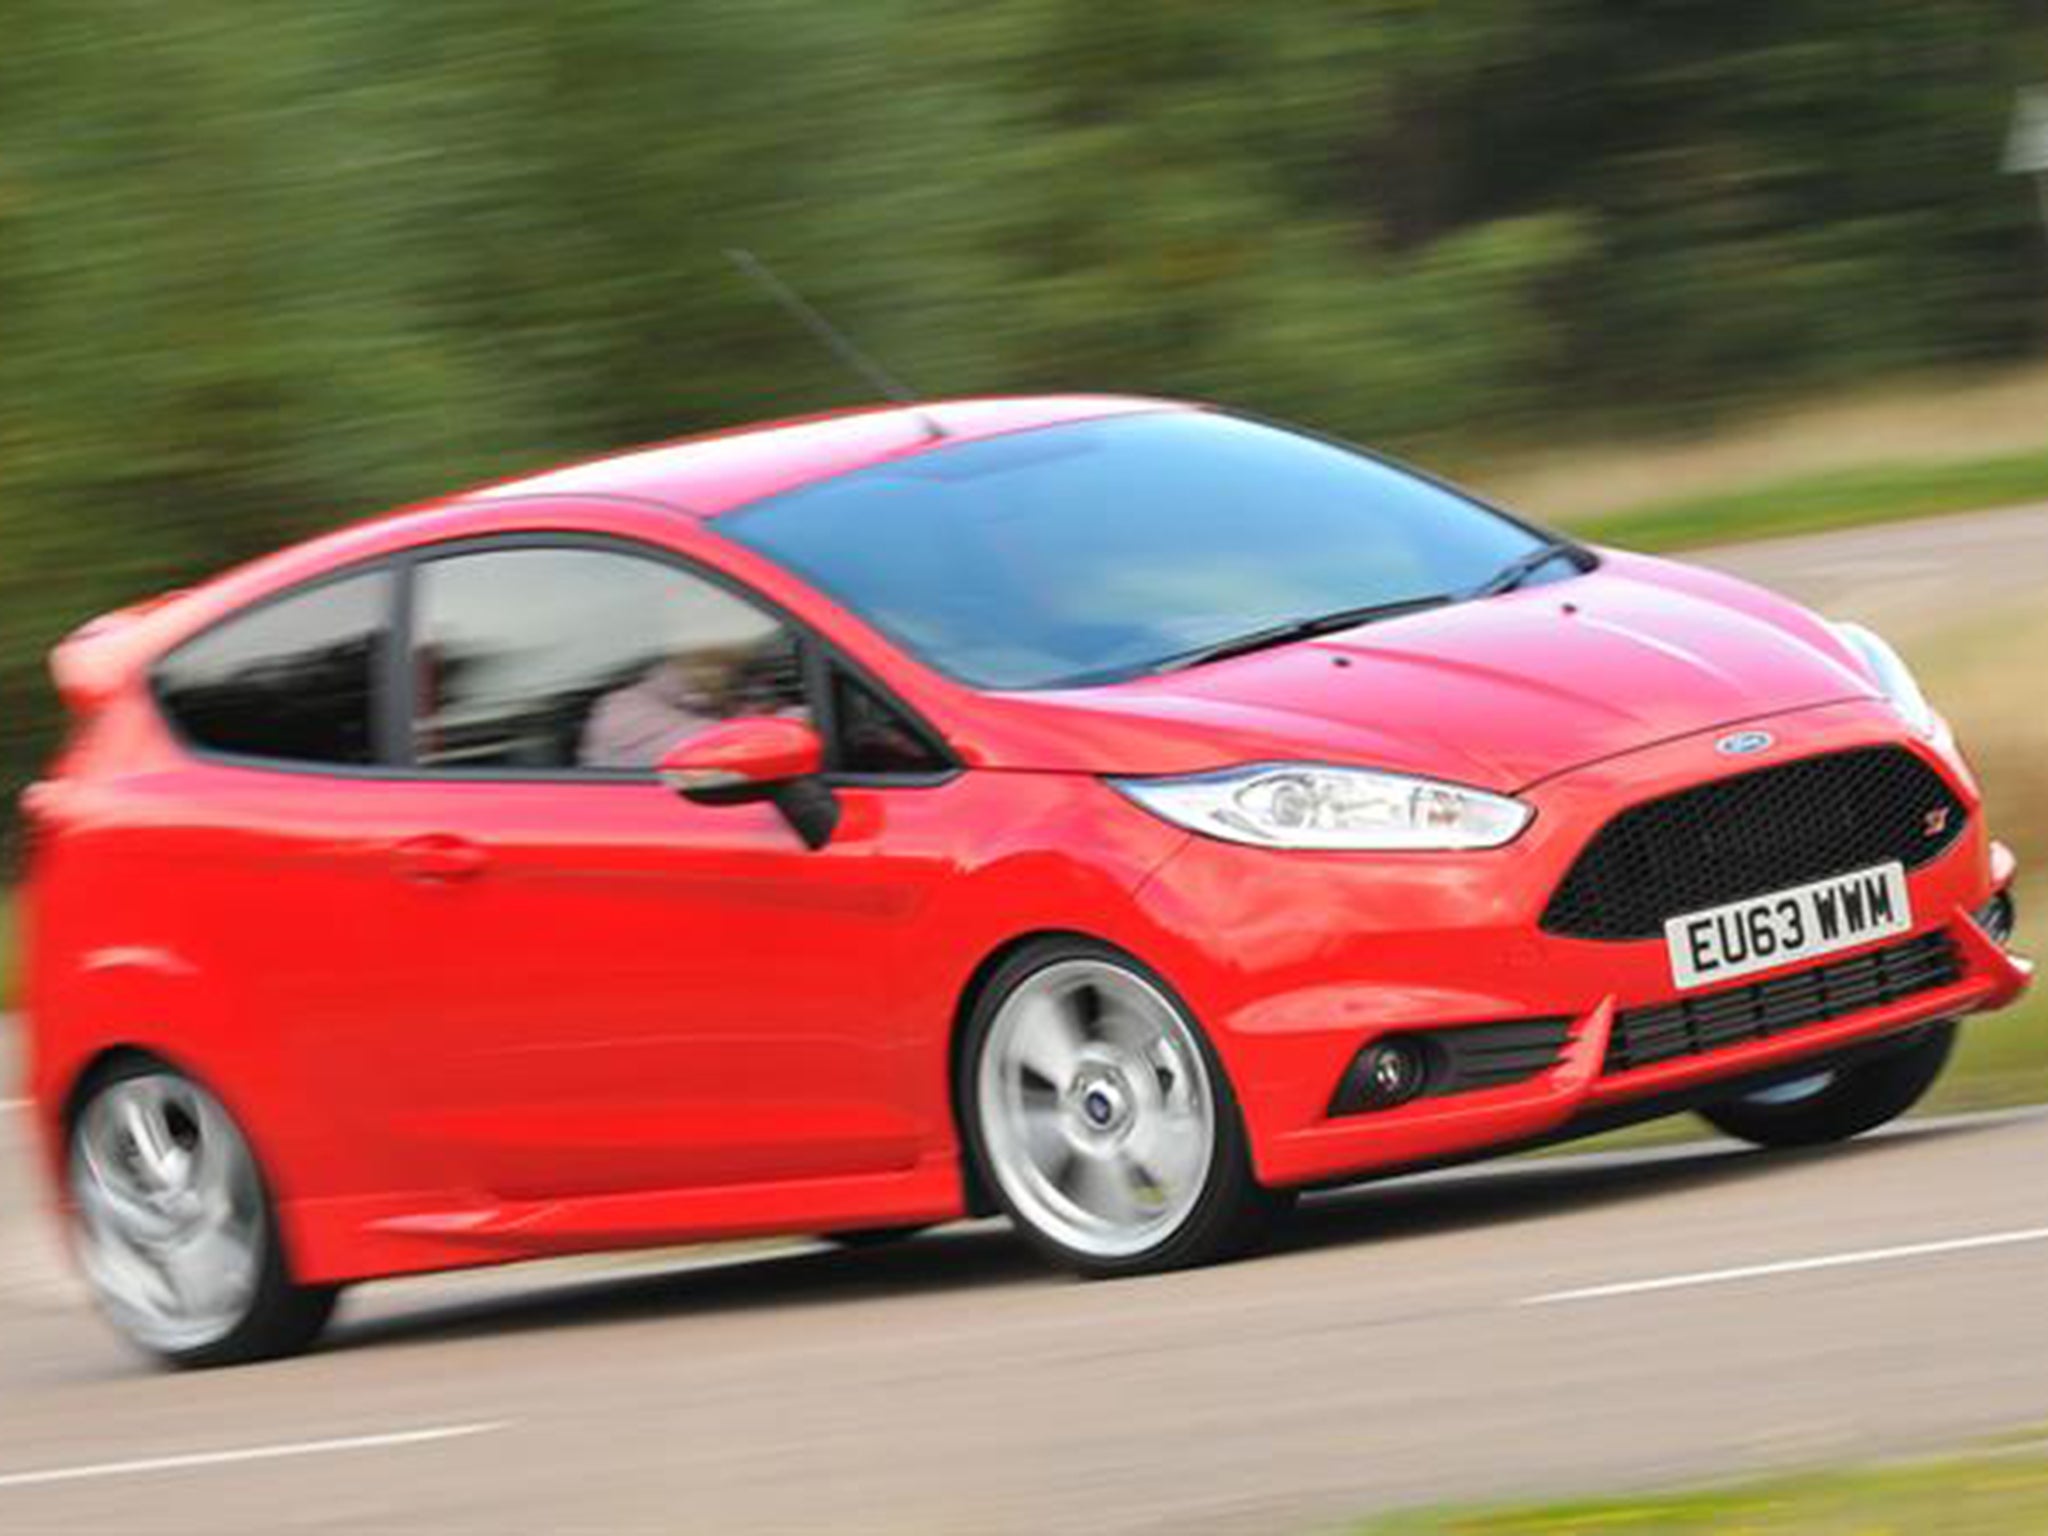 The hot Fiesta builds on the standard car's already impressive strengths